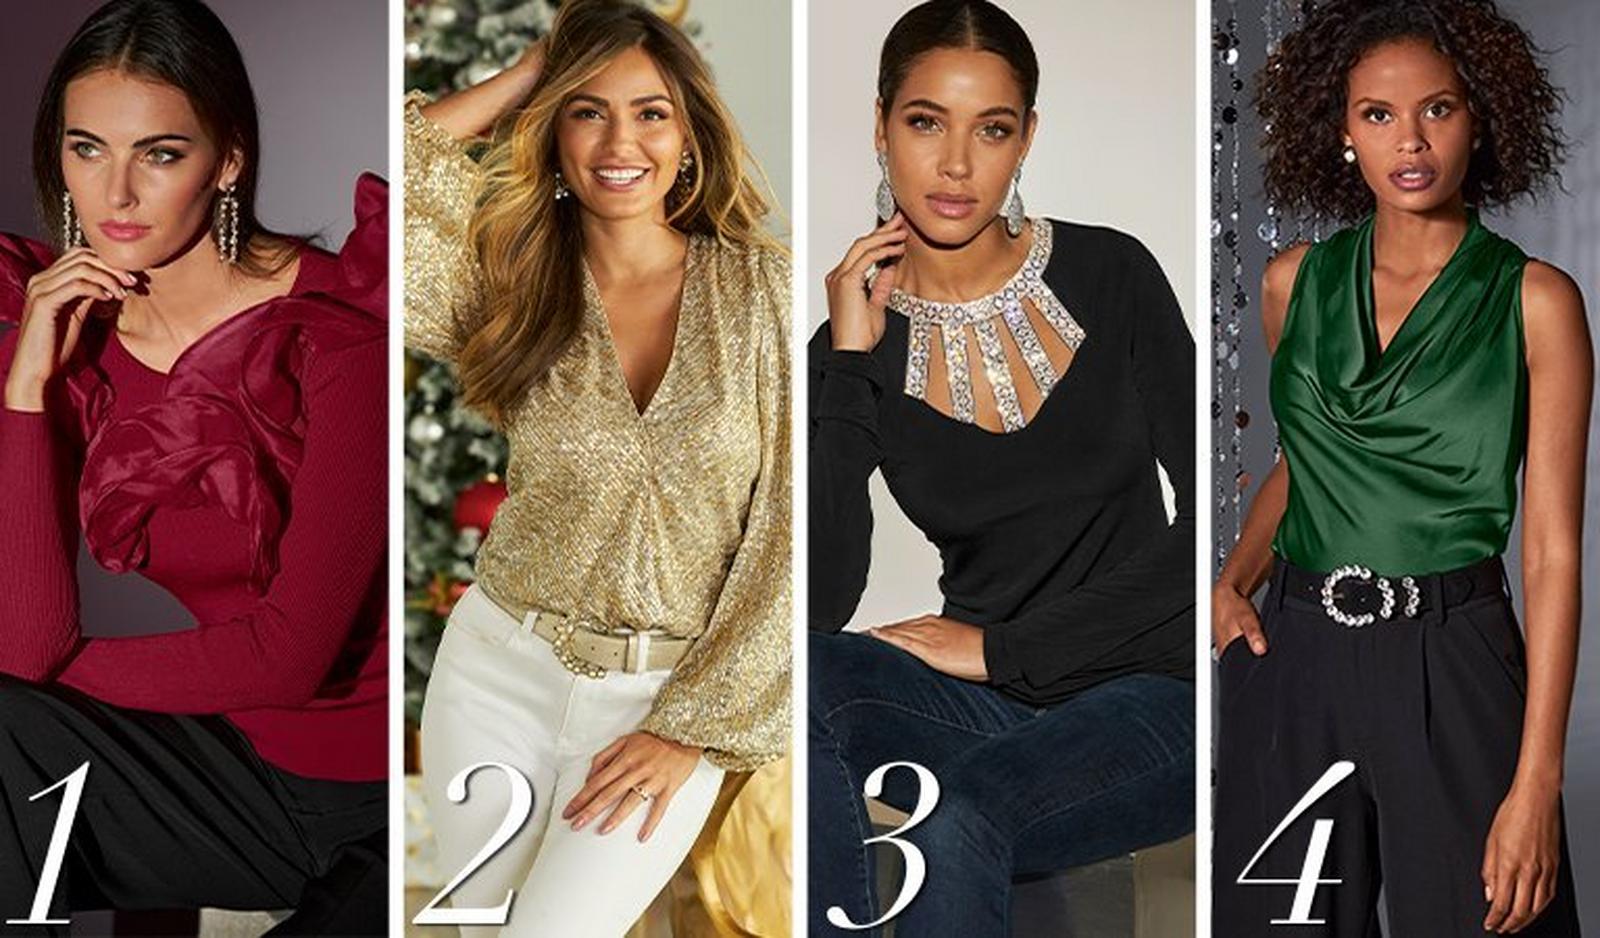 from left to right: first model wearing a red long-sleeve sweater with an organza ruffle and black pants. second model wearing a gold sequin surplice long-sleeve blouse, gold rhinestone belt, and white jeans. third model wearing a black long-sleeve top with rhinestone embellished cage detail neckline and jeans. fourth model wearing an emerald green cowl neck sleeveless charmeuse louse, black rhinestone embellished belt, and black wide-leg crepe pants.